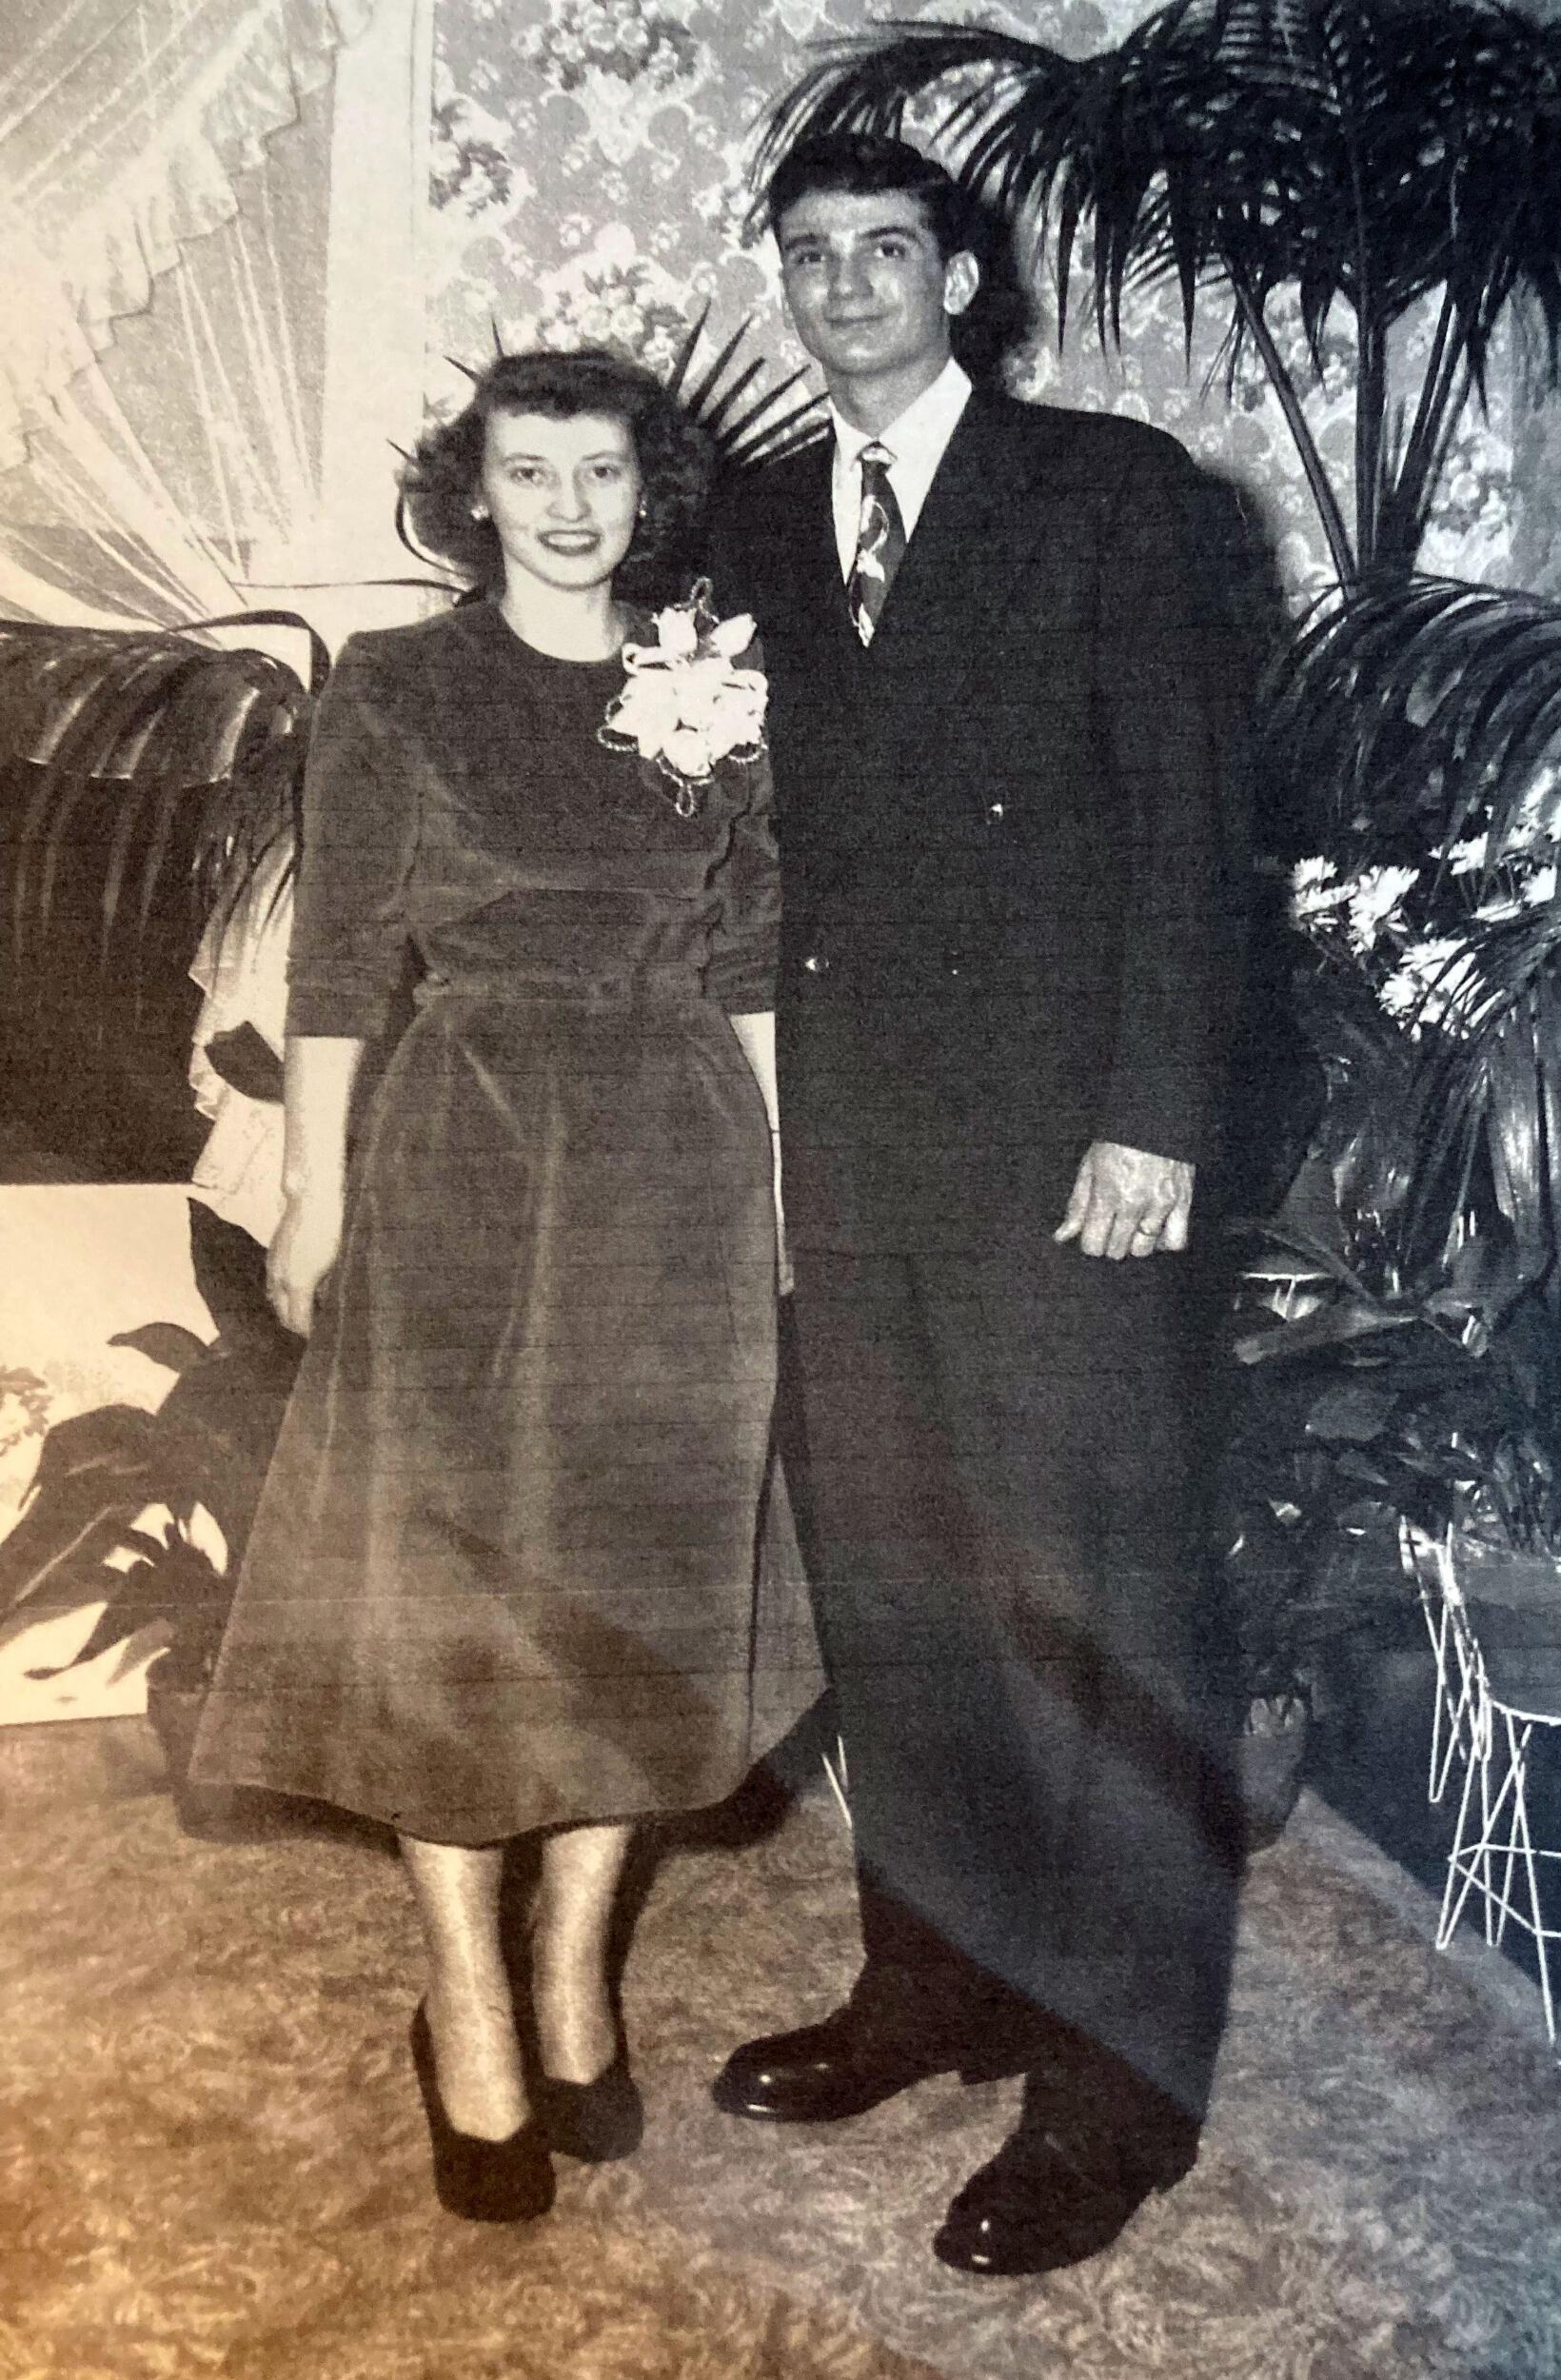 Miriam and Bill Blake on their wedding day in 1949.